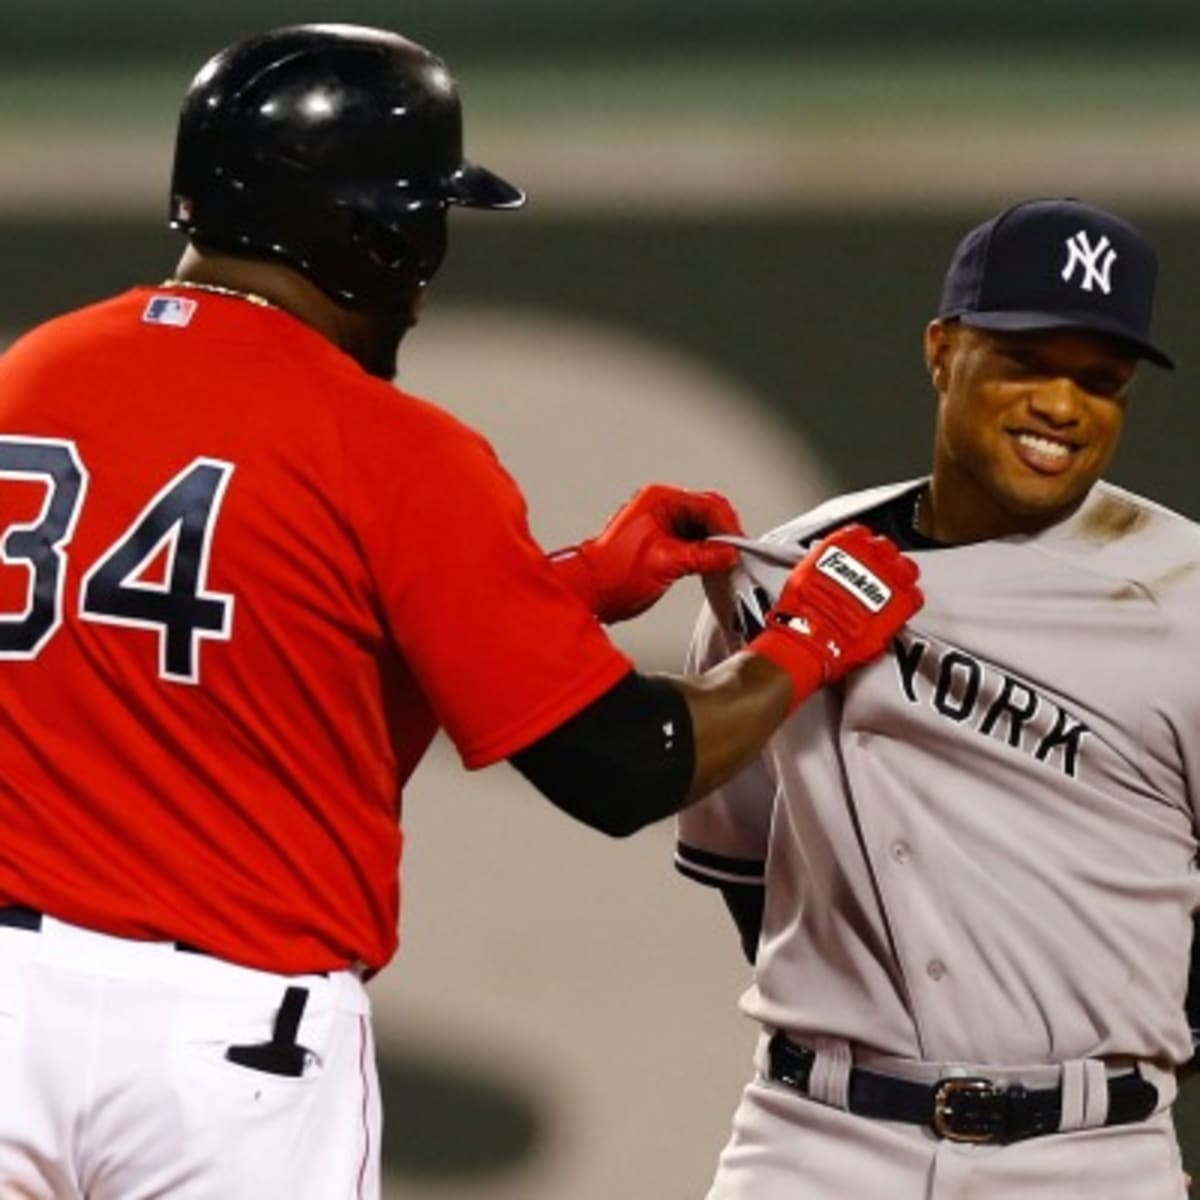 That didn't take long: Yankees re-issue Robinson Cano's No. 24